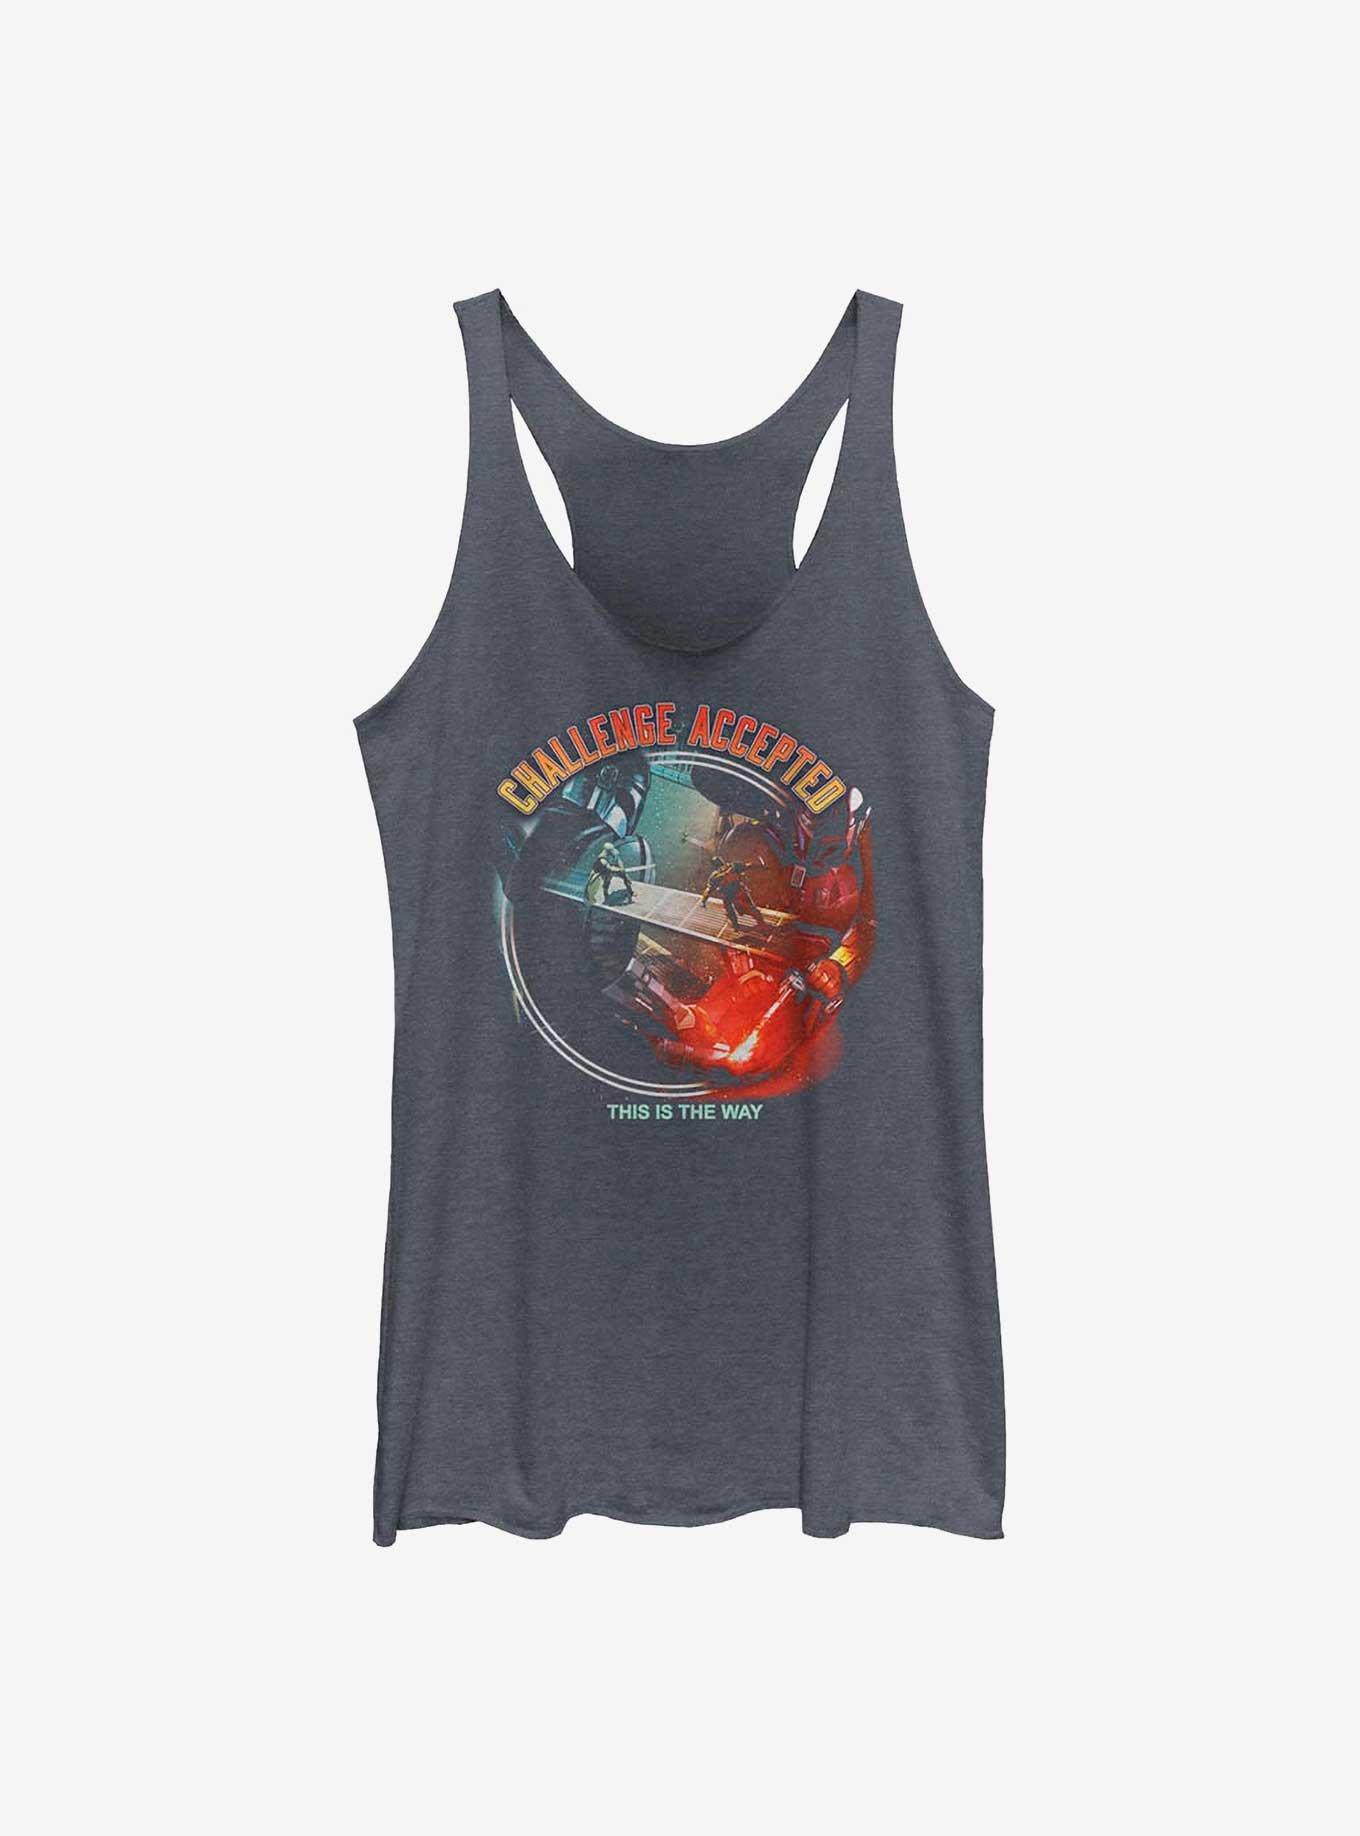 Star Wars The Book Of Boba Fett Challenge Accepted Girls Tank Top, NAVY HTR, hi-res